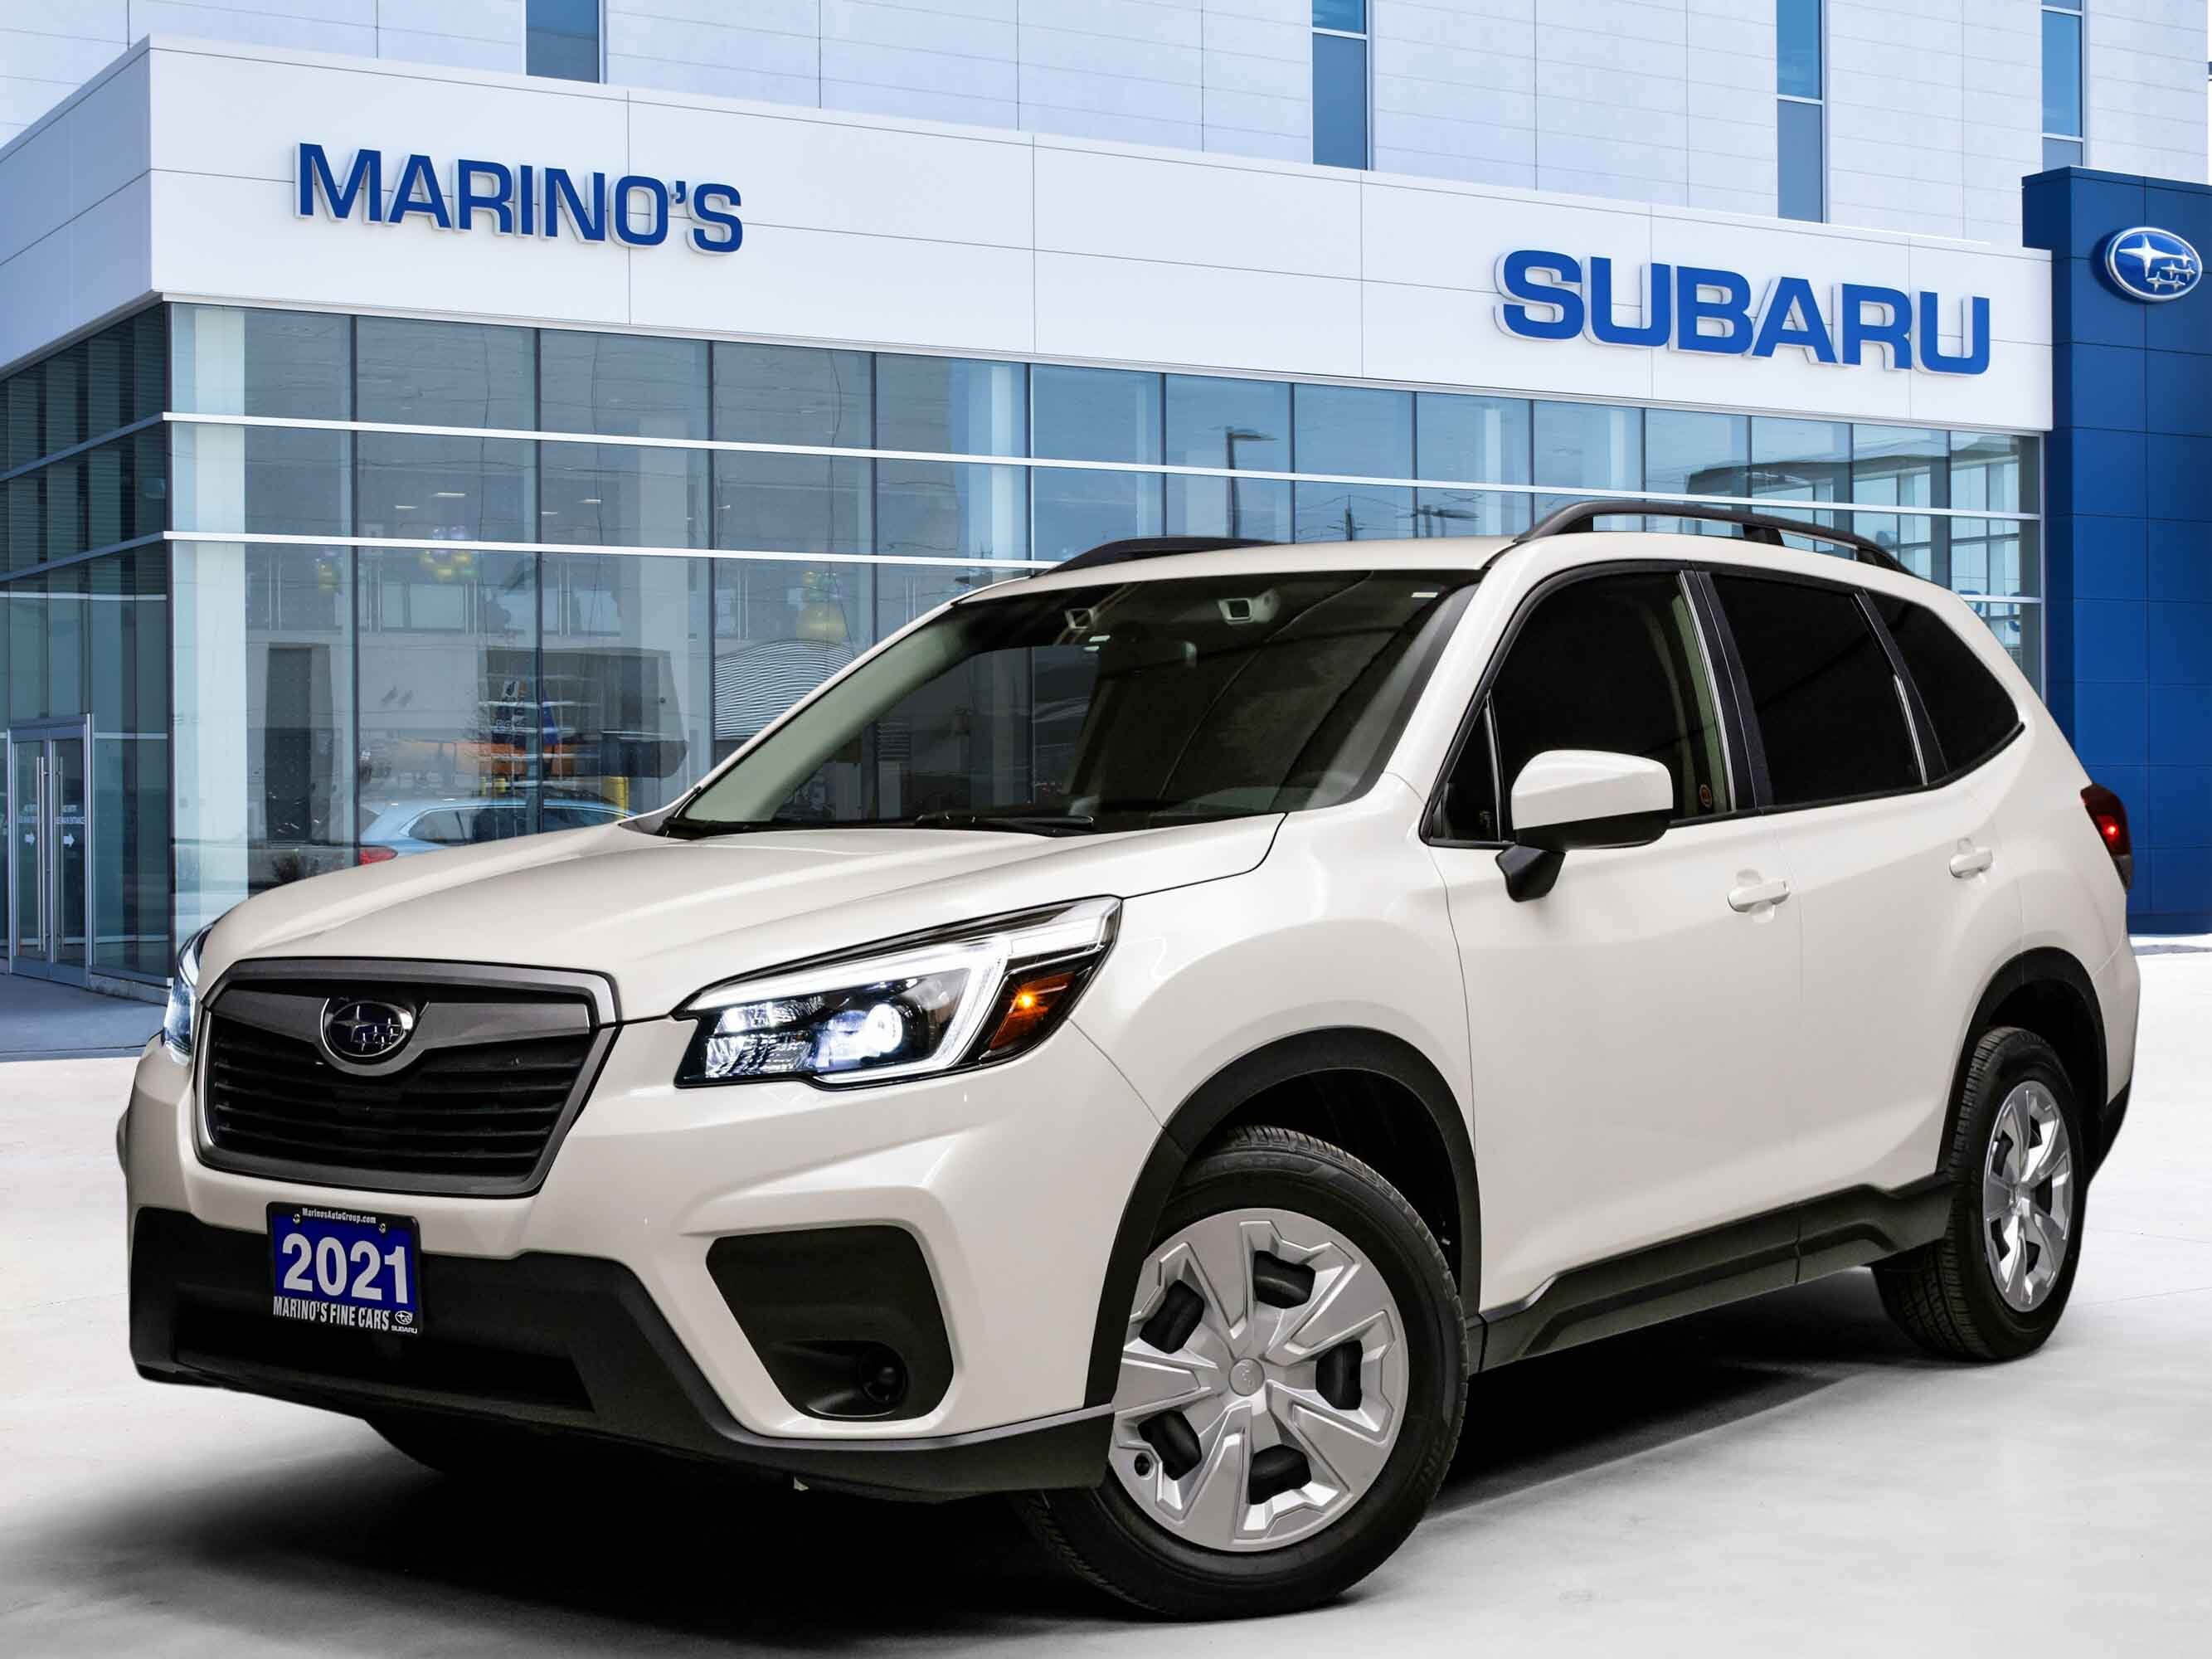 2021 Subaru Forester 2.5i Base Trim with tinted front windows